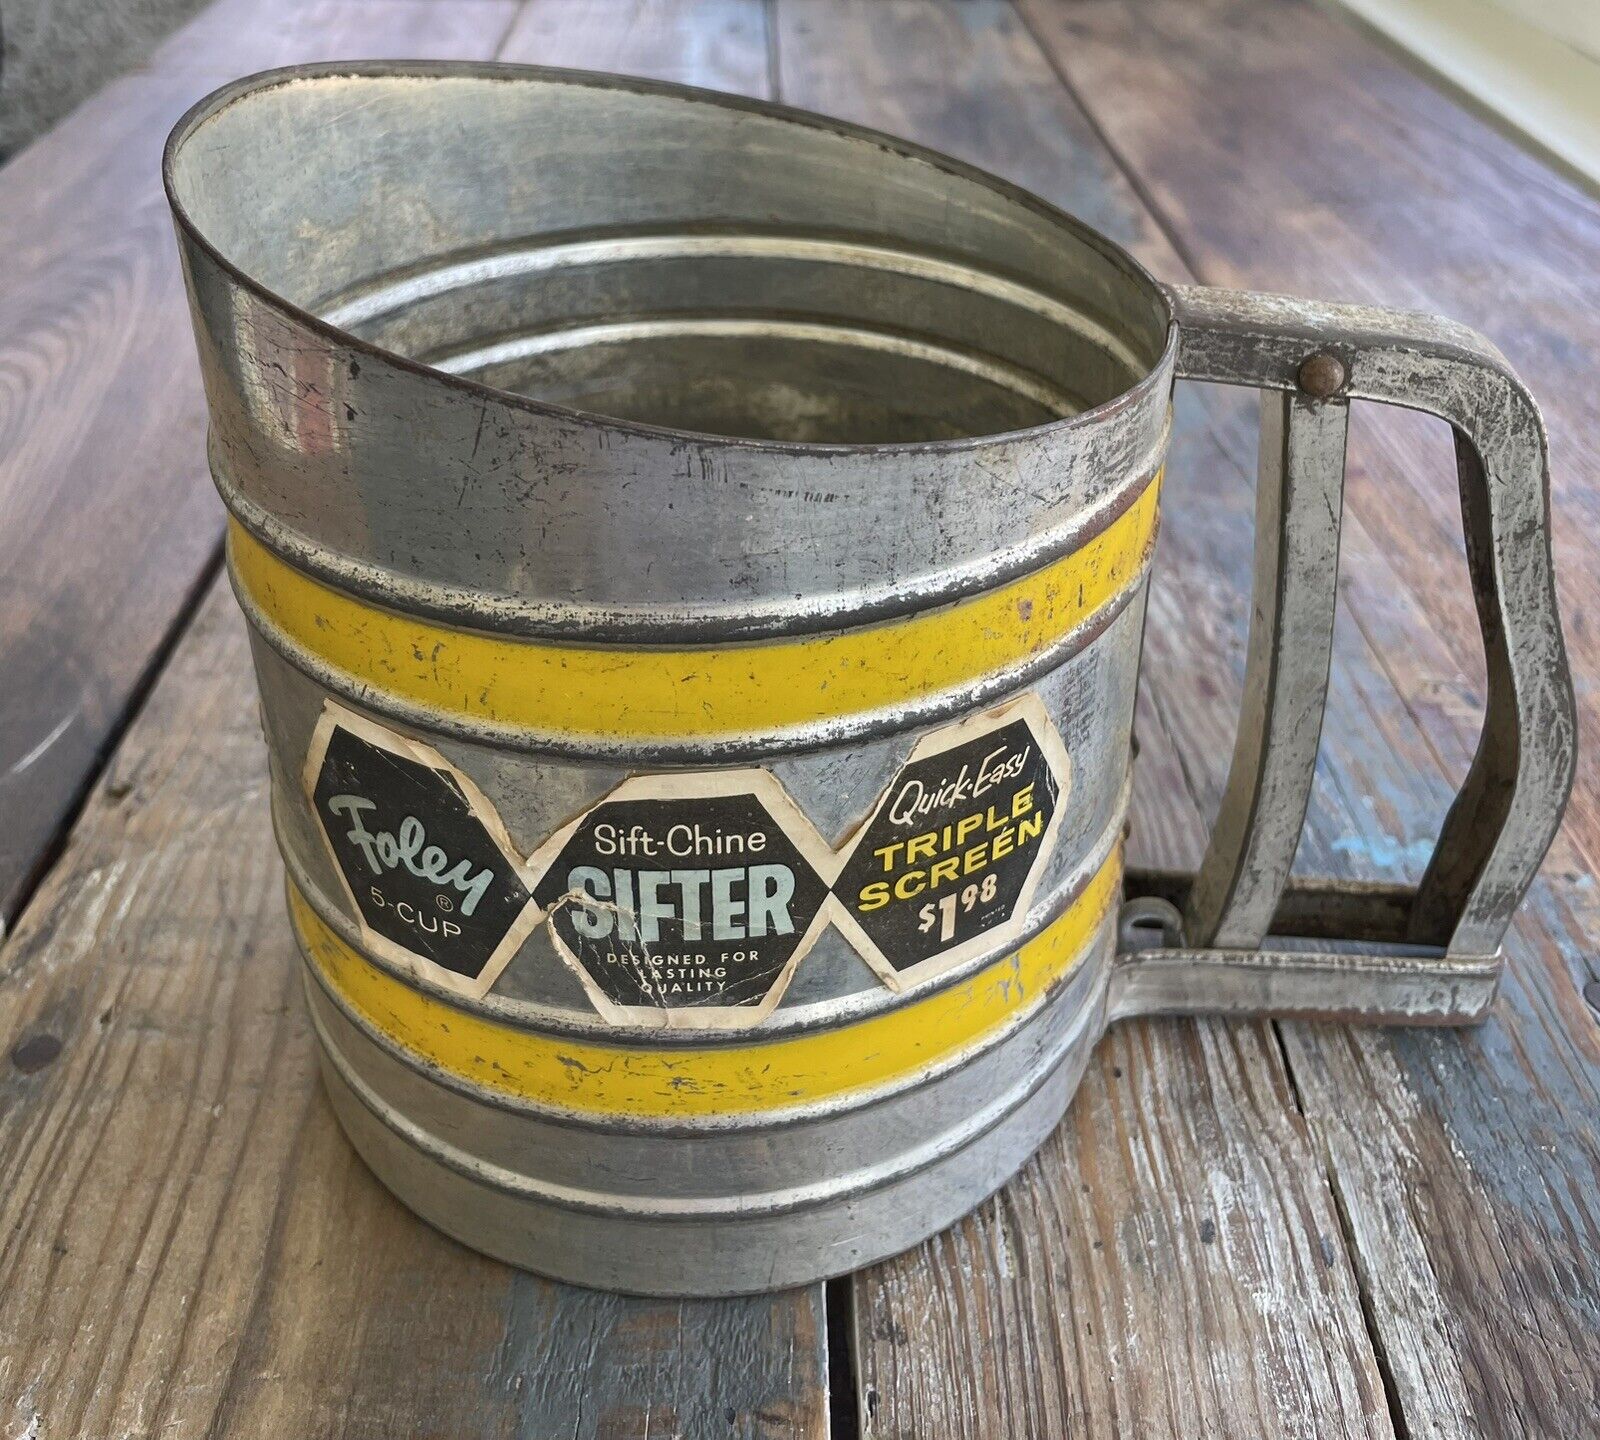 Vintage Foley  5 Cup Sift-Chine Triple Screen Flour Sifter-Works. (+ Freebie)